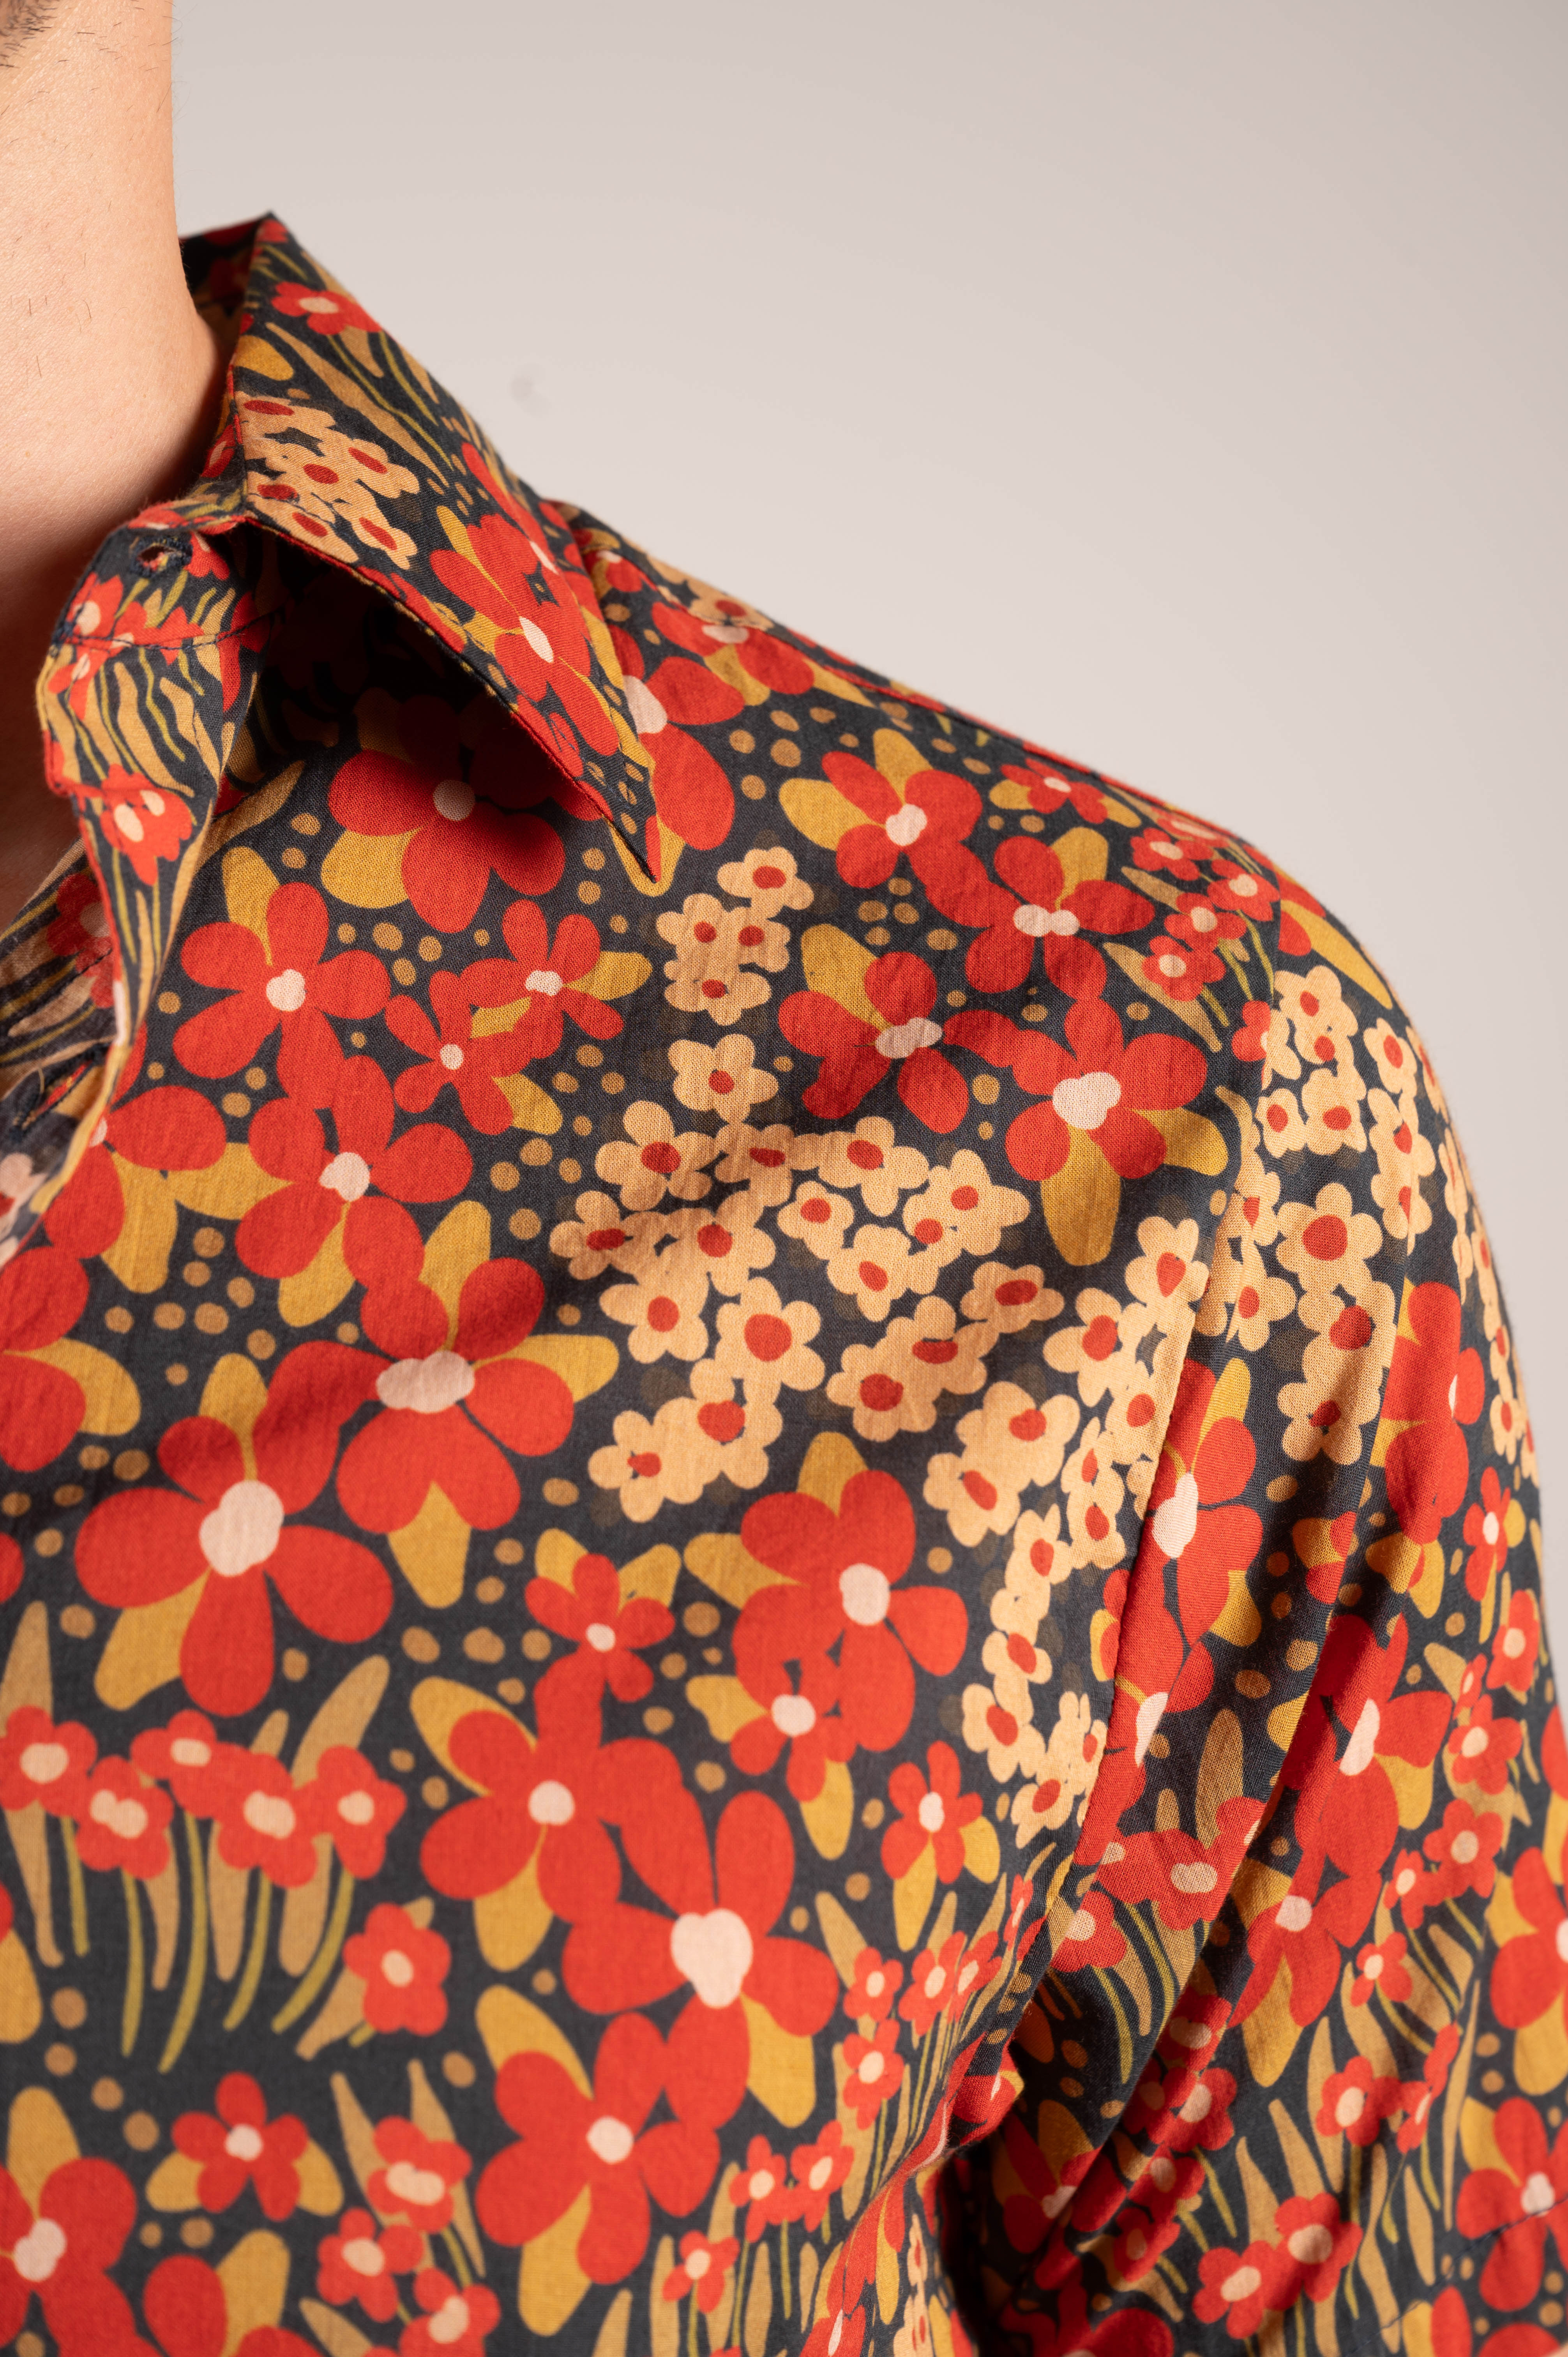 'The Sheril' Short Sleeve Shirt in Red and Black Floral Print